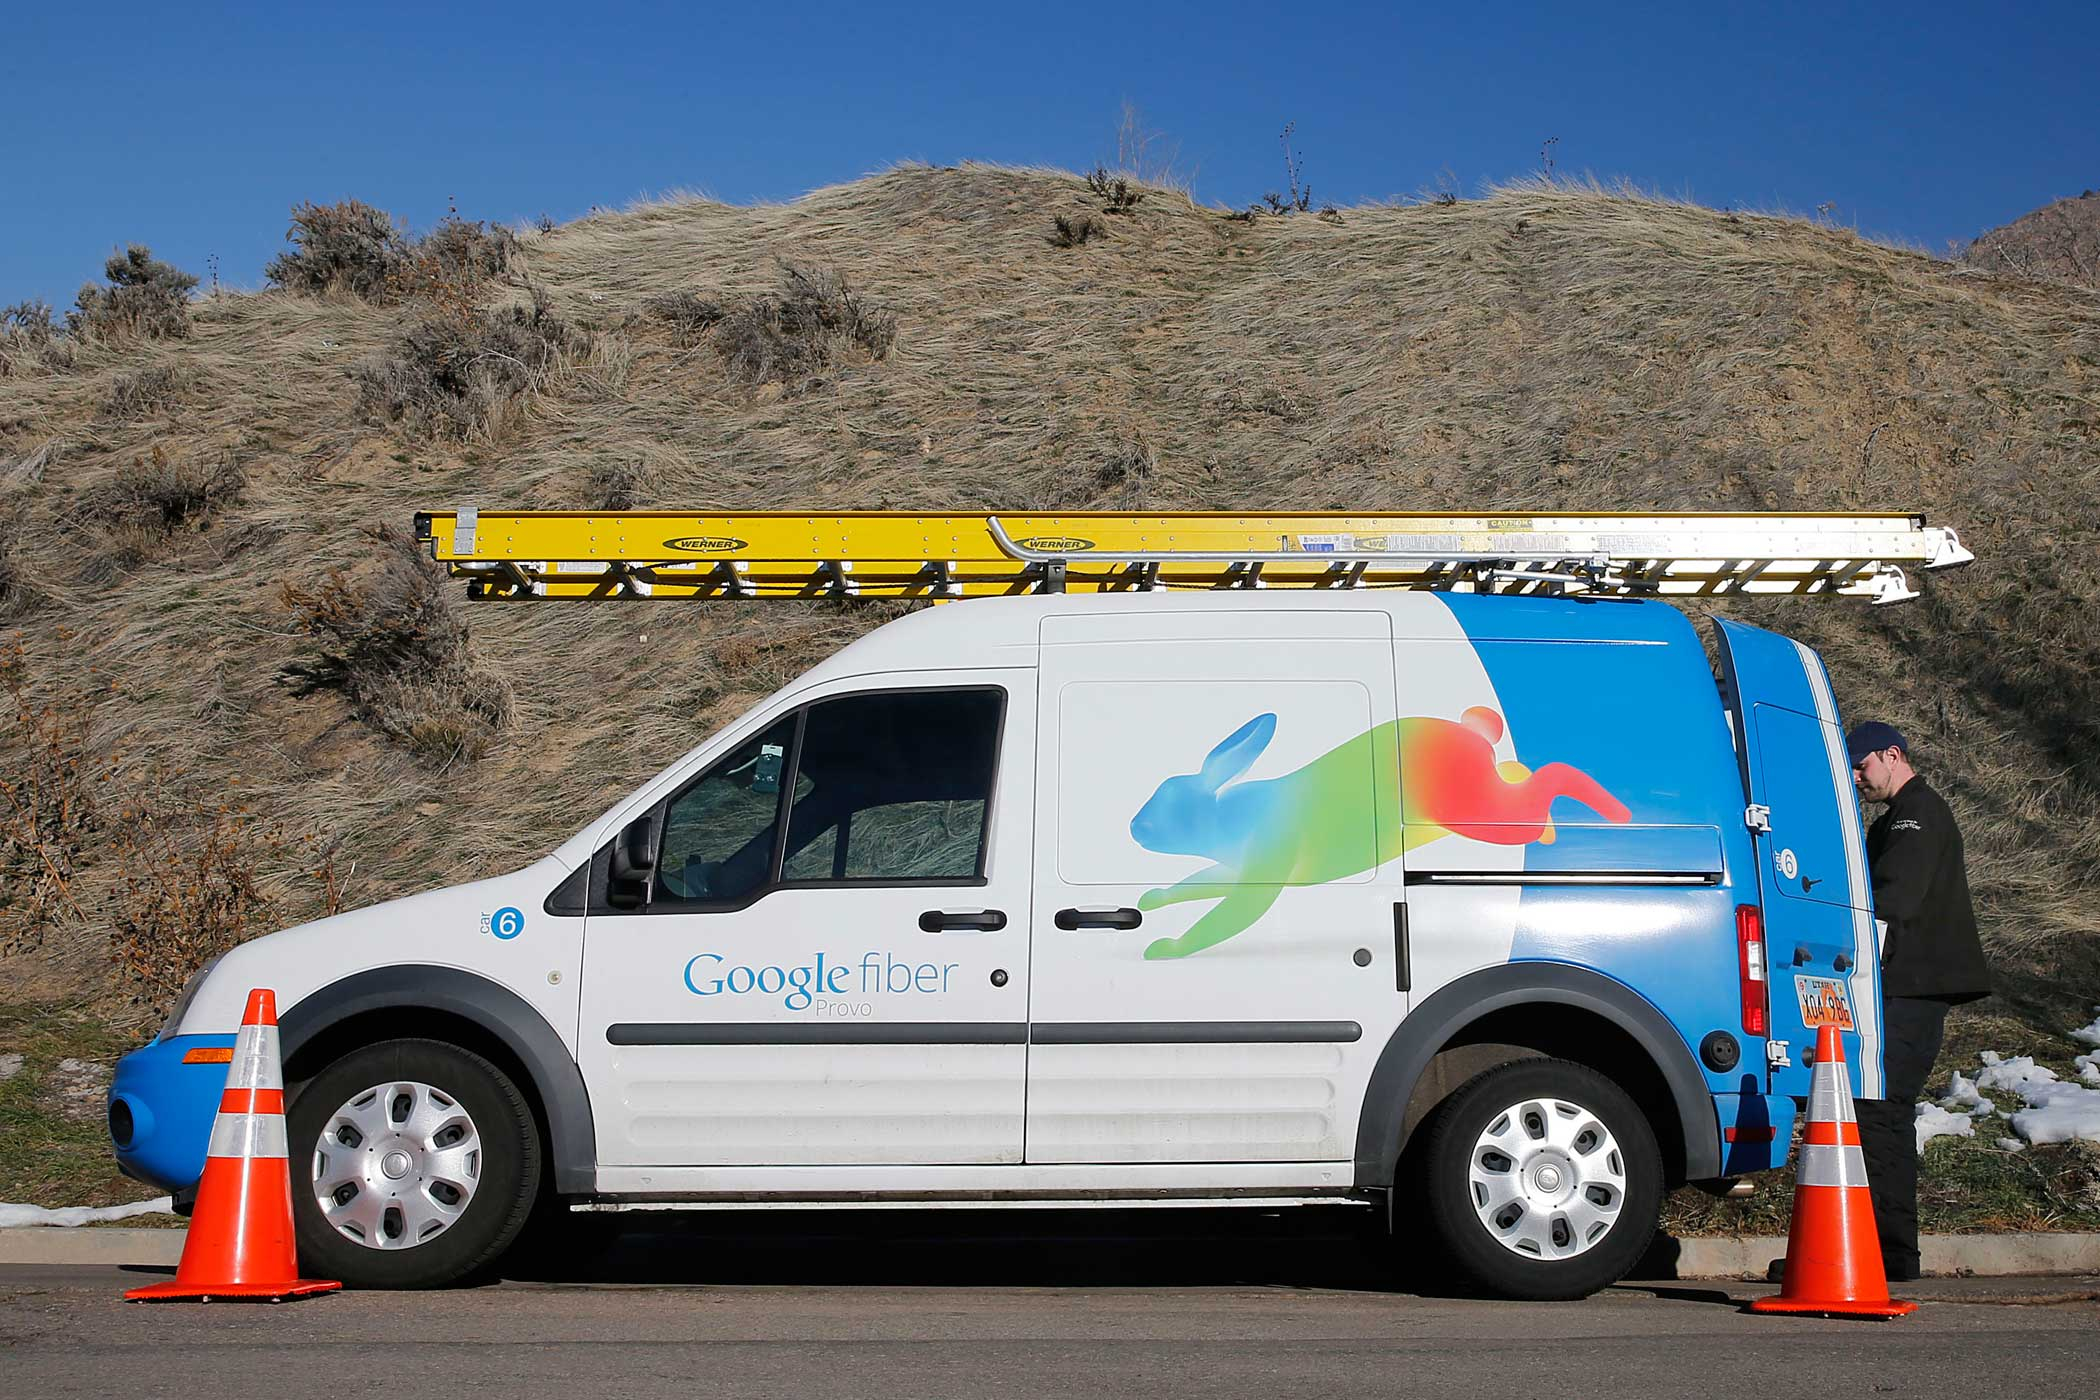 A Google Fiber technician gets supplies out of his truck to install Google Fiber in a residential home in Provo, Utah, January 2, 2014. Provo is one of three cities Google is currently building and installing gigabit internet and television service for business and residential use.